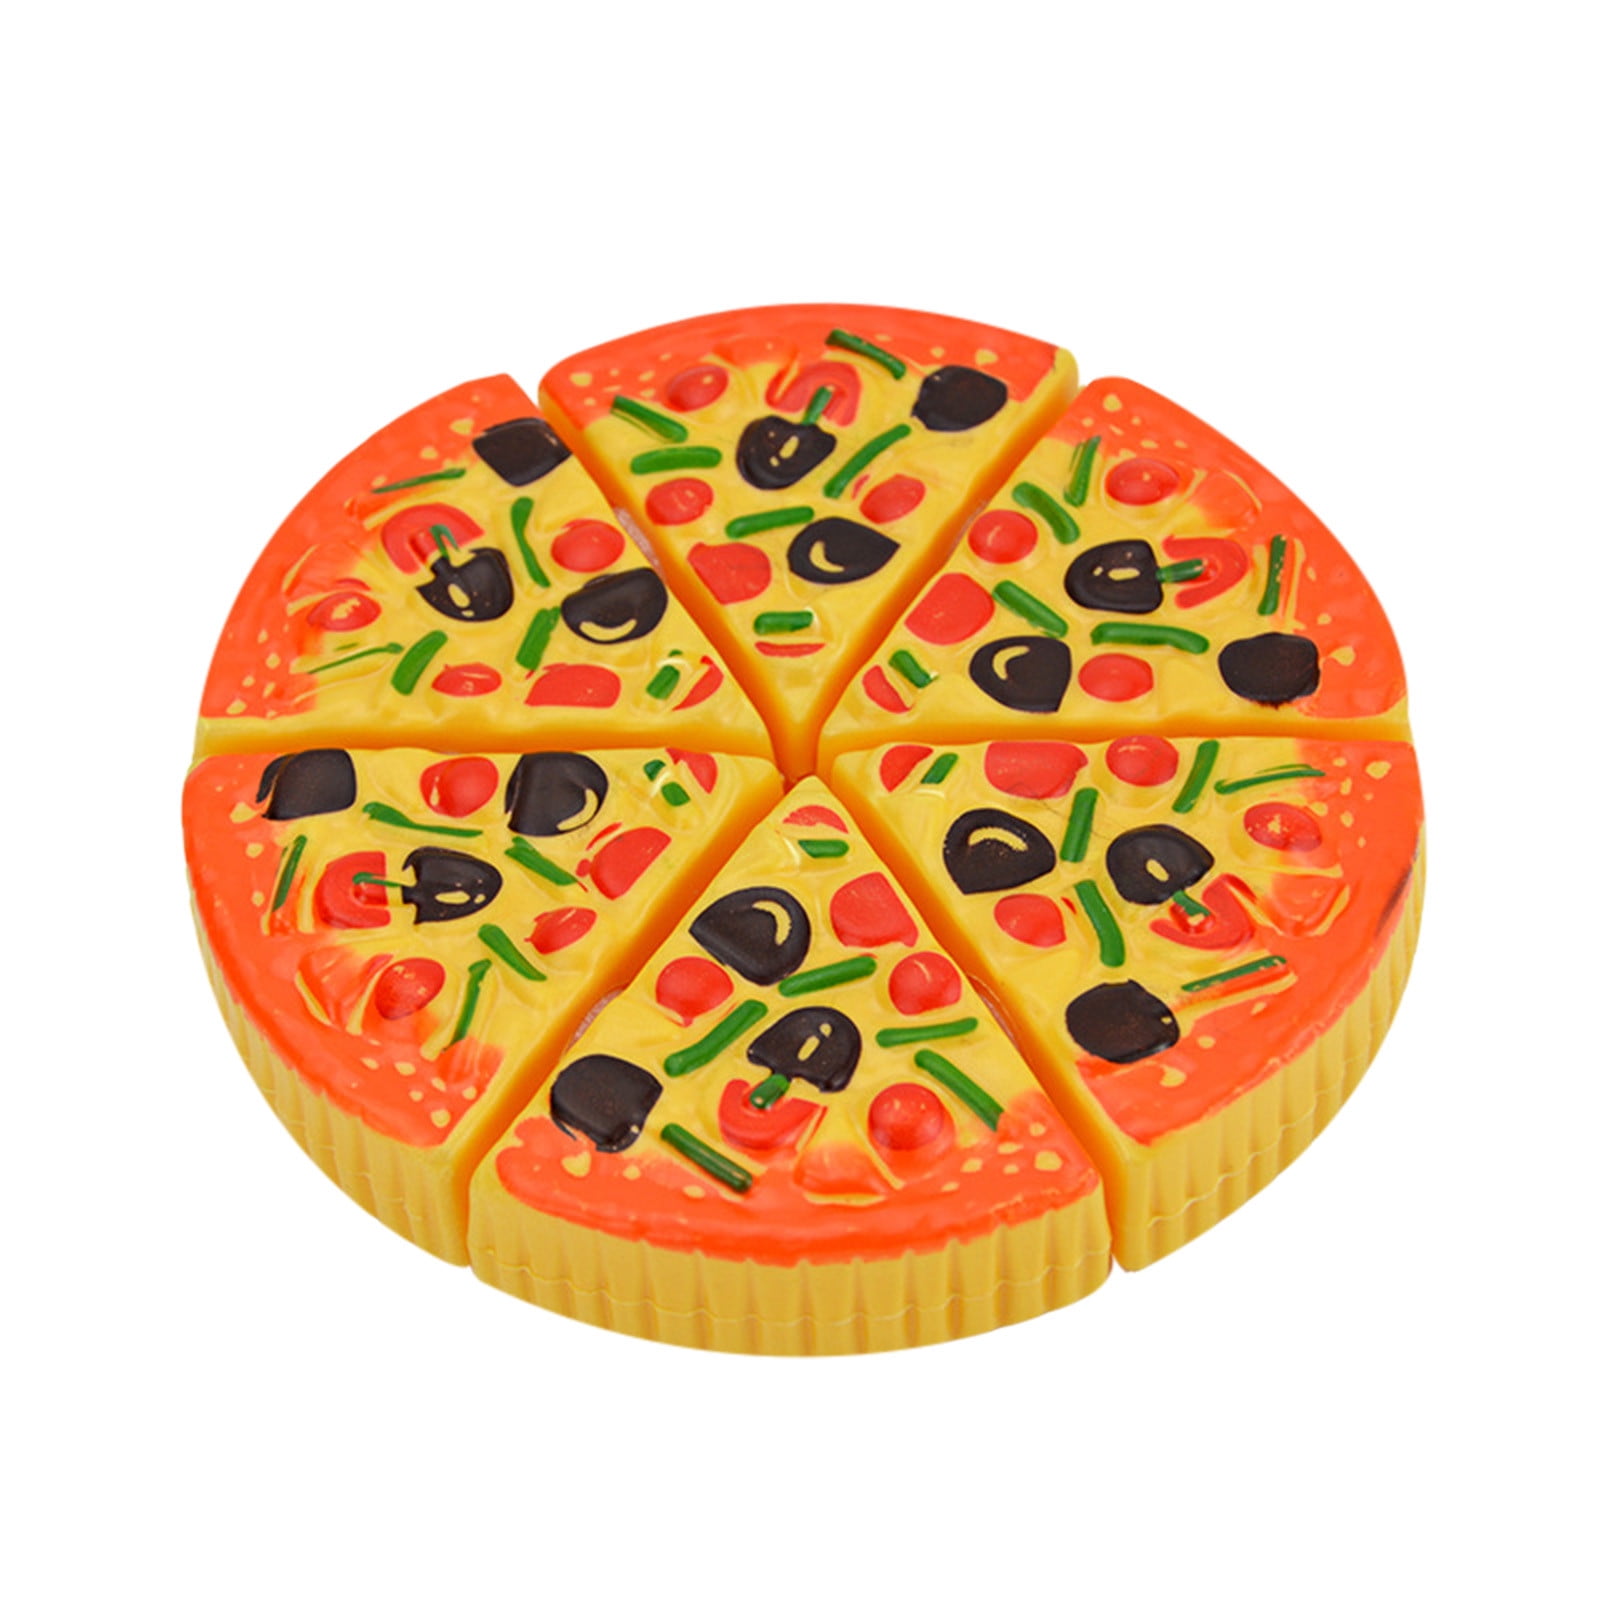 Pretend Pizza Slices Toppings Dinner Kitchen Play Food Toys For Kids Game Z 